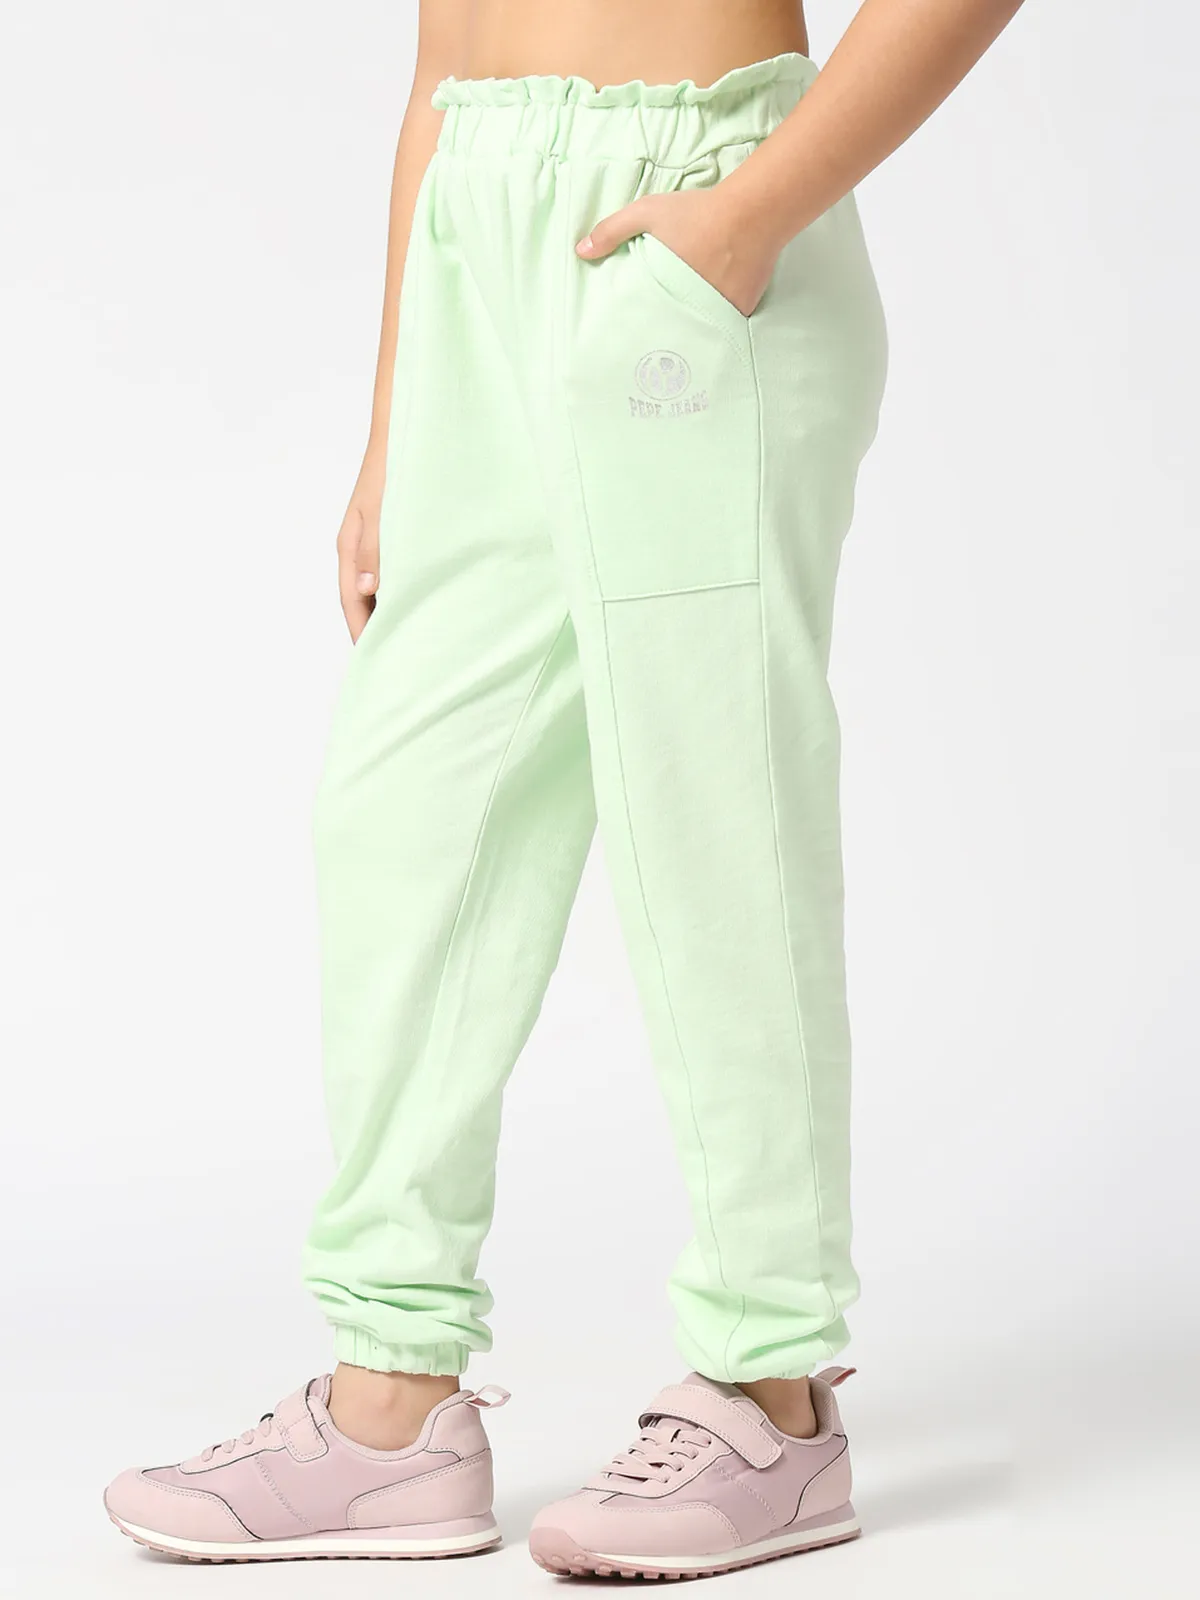 Pepe Jeans cotton pista green joggers